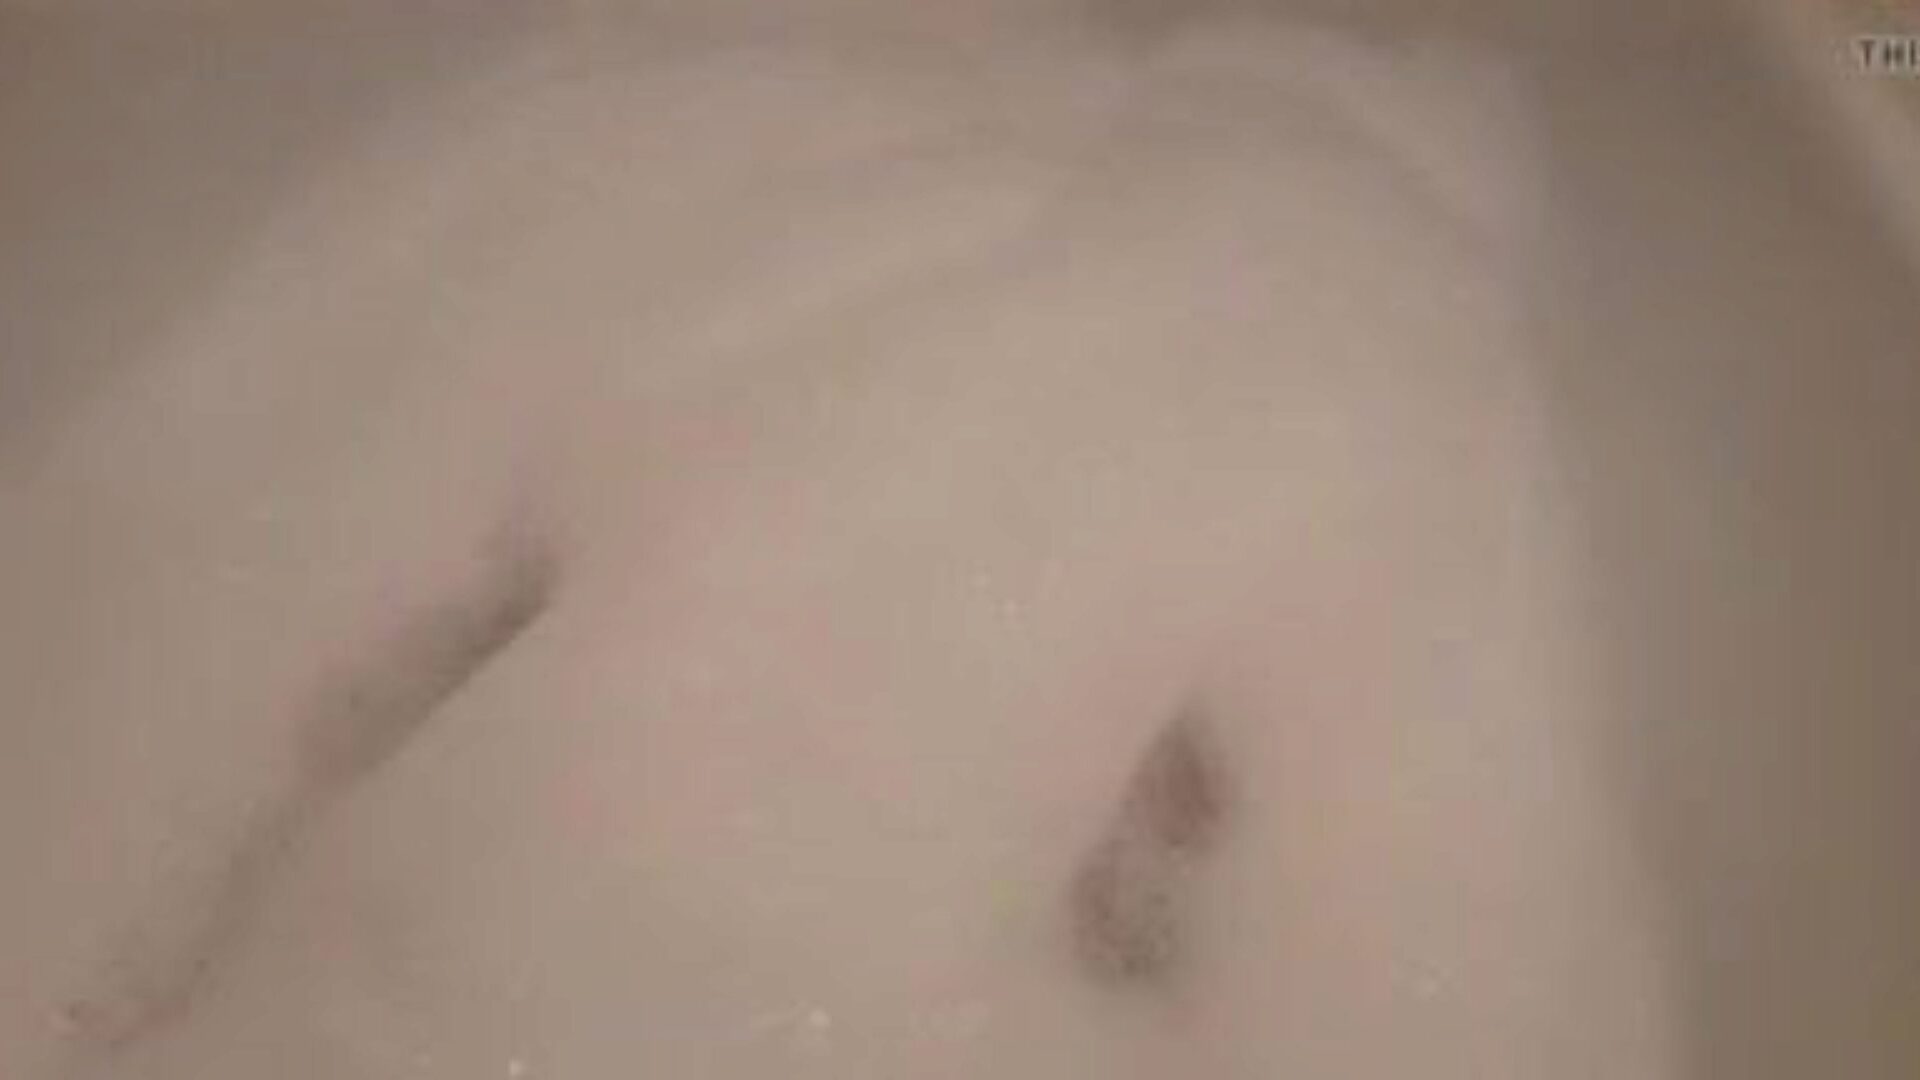 Linda Bath2: Free Tight Pussy Porn Video 10 - xHamster Watch Linda Bath2 tube fuckfest video for free-for-all on xHamster, with the sexiest collection of German Tight Pussy, Water & sixty nine porn video vignettes